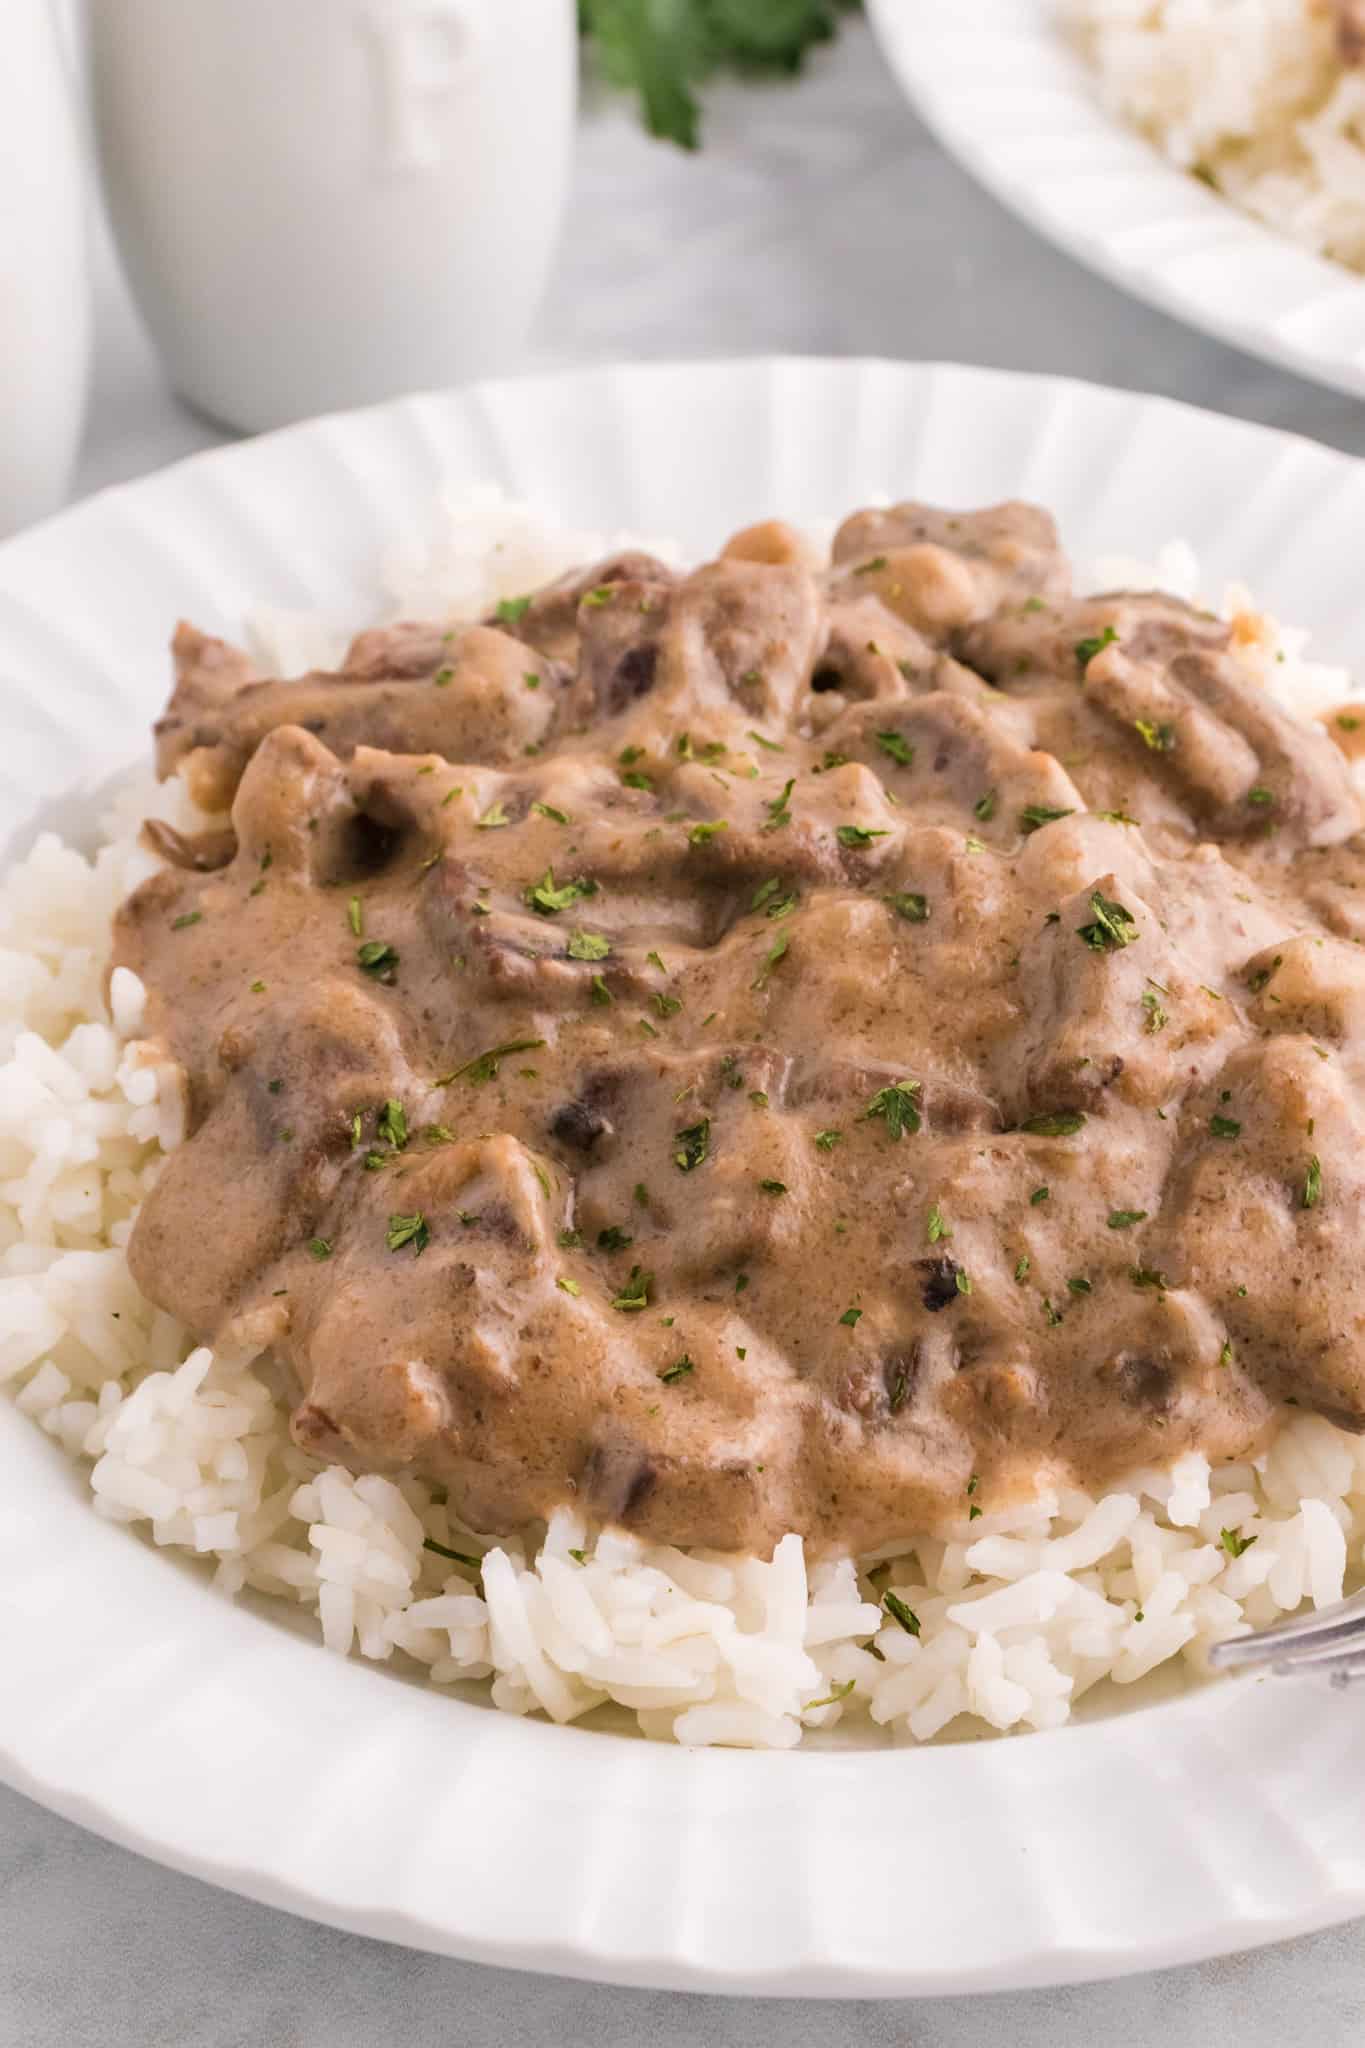 Steak and Rice is a hearty comfort food dish with tender pieces of steak cooked in a creamy mushroom sauce and served over rice.